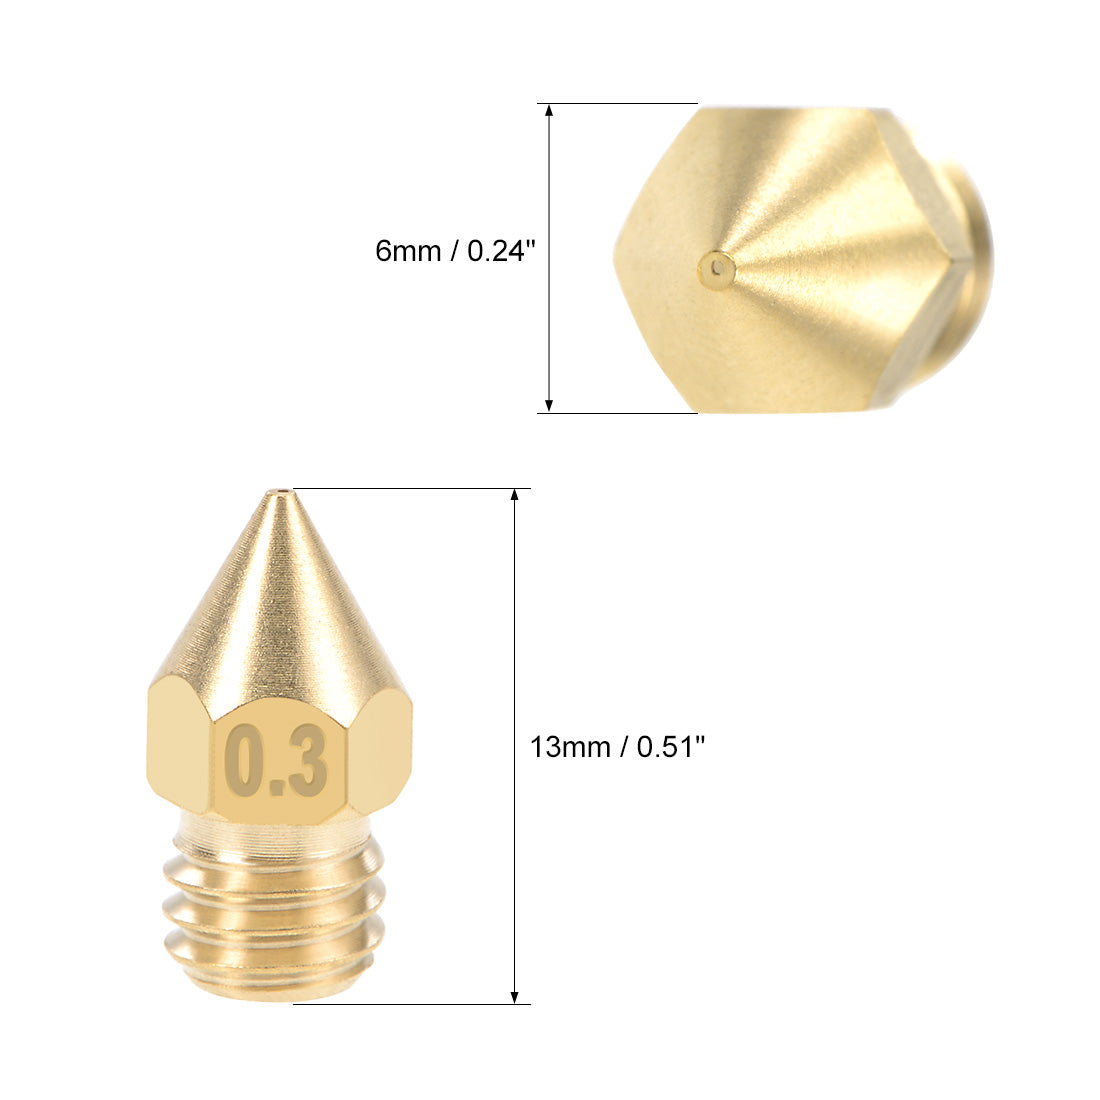 uxcell Uxcell 0.3mm 3D Printer Nozzle Head M6 for MK8 1.75mm Extruder Print, Brass 10pcs